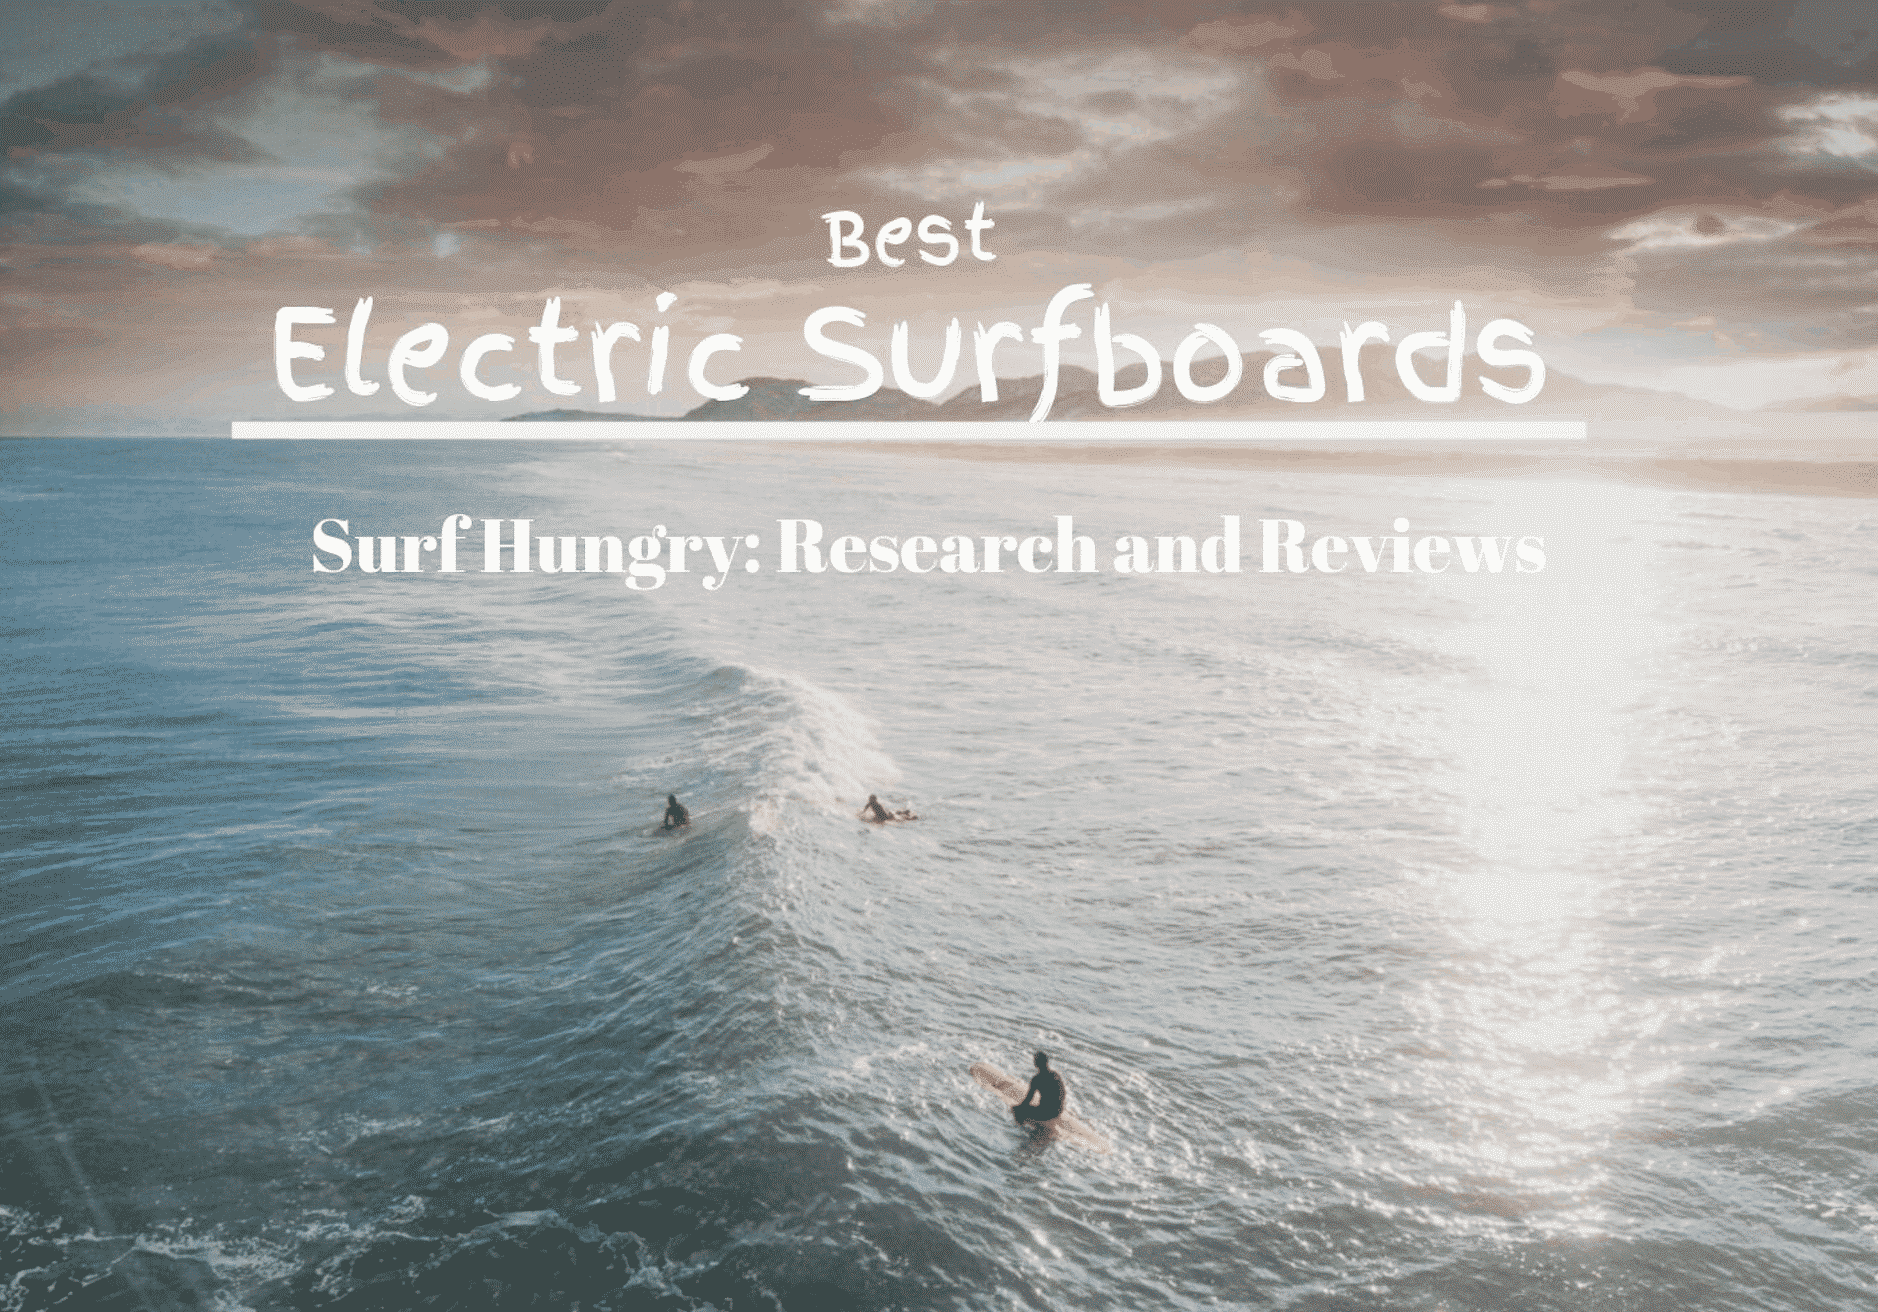 Best Electric Surfboards for 2021